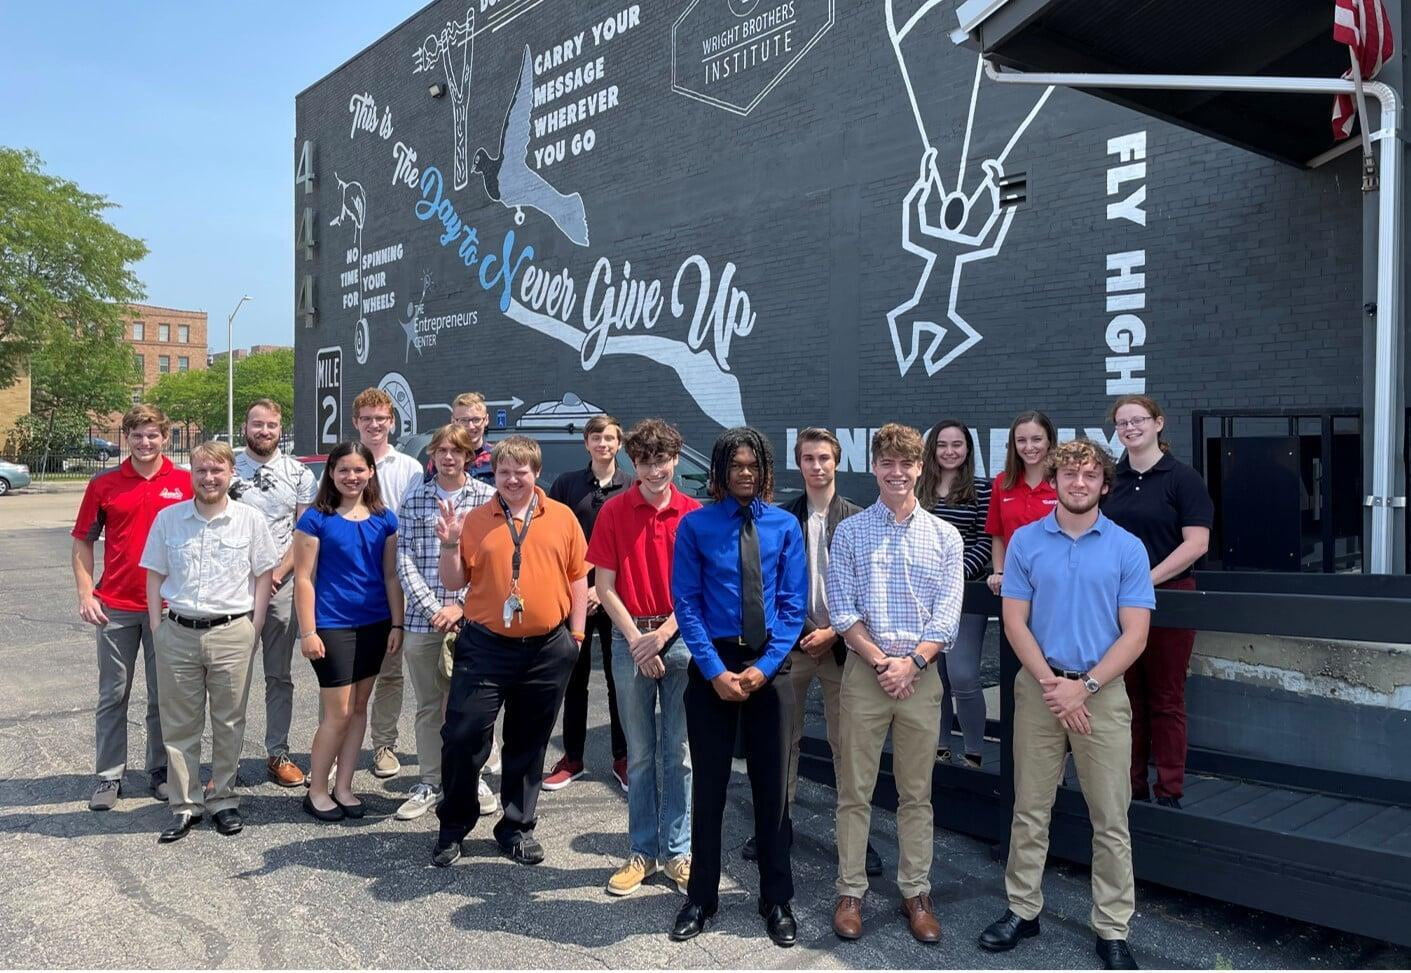 Guest Blog Excerpt: AFRL teams up with Wright Brothers Institute for summer internship program